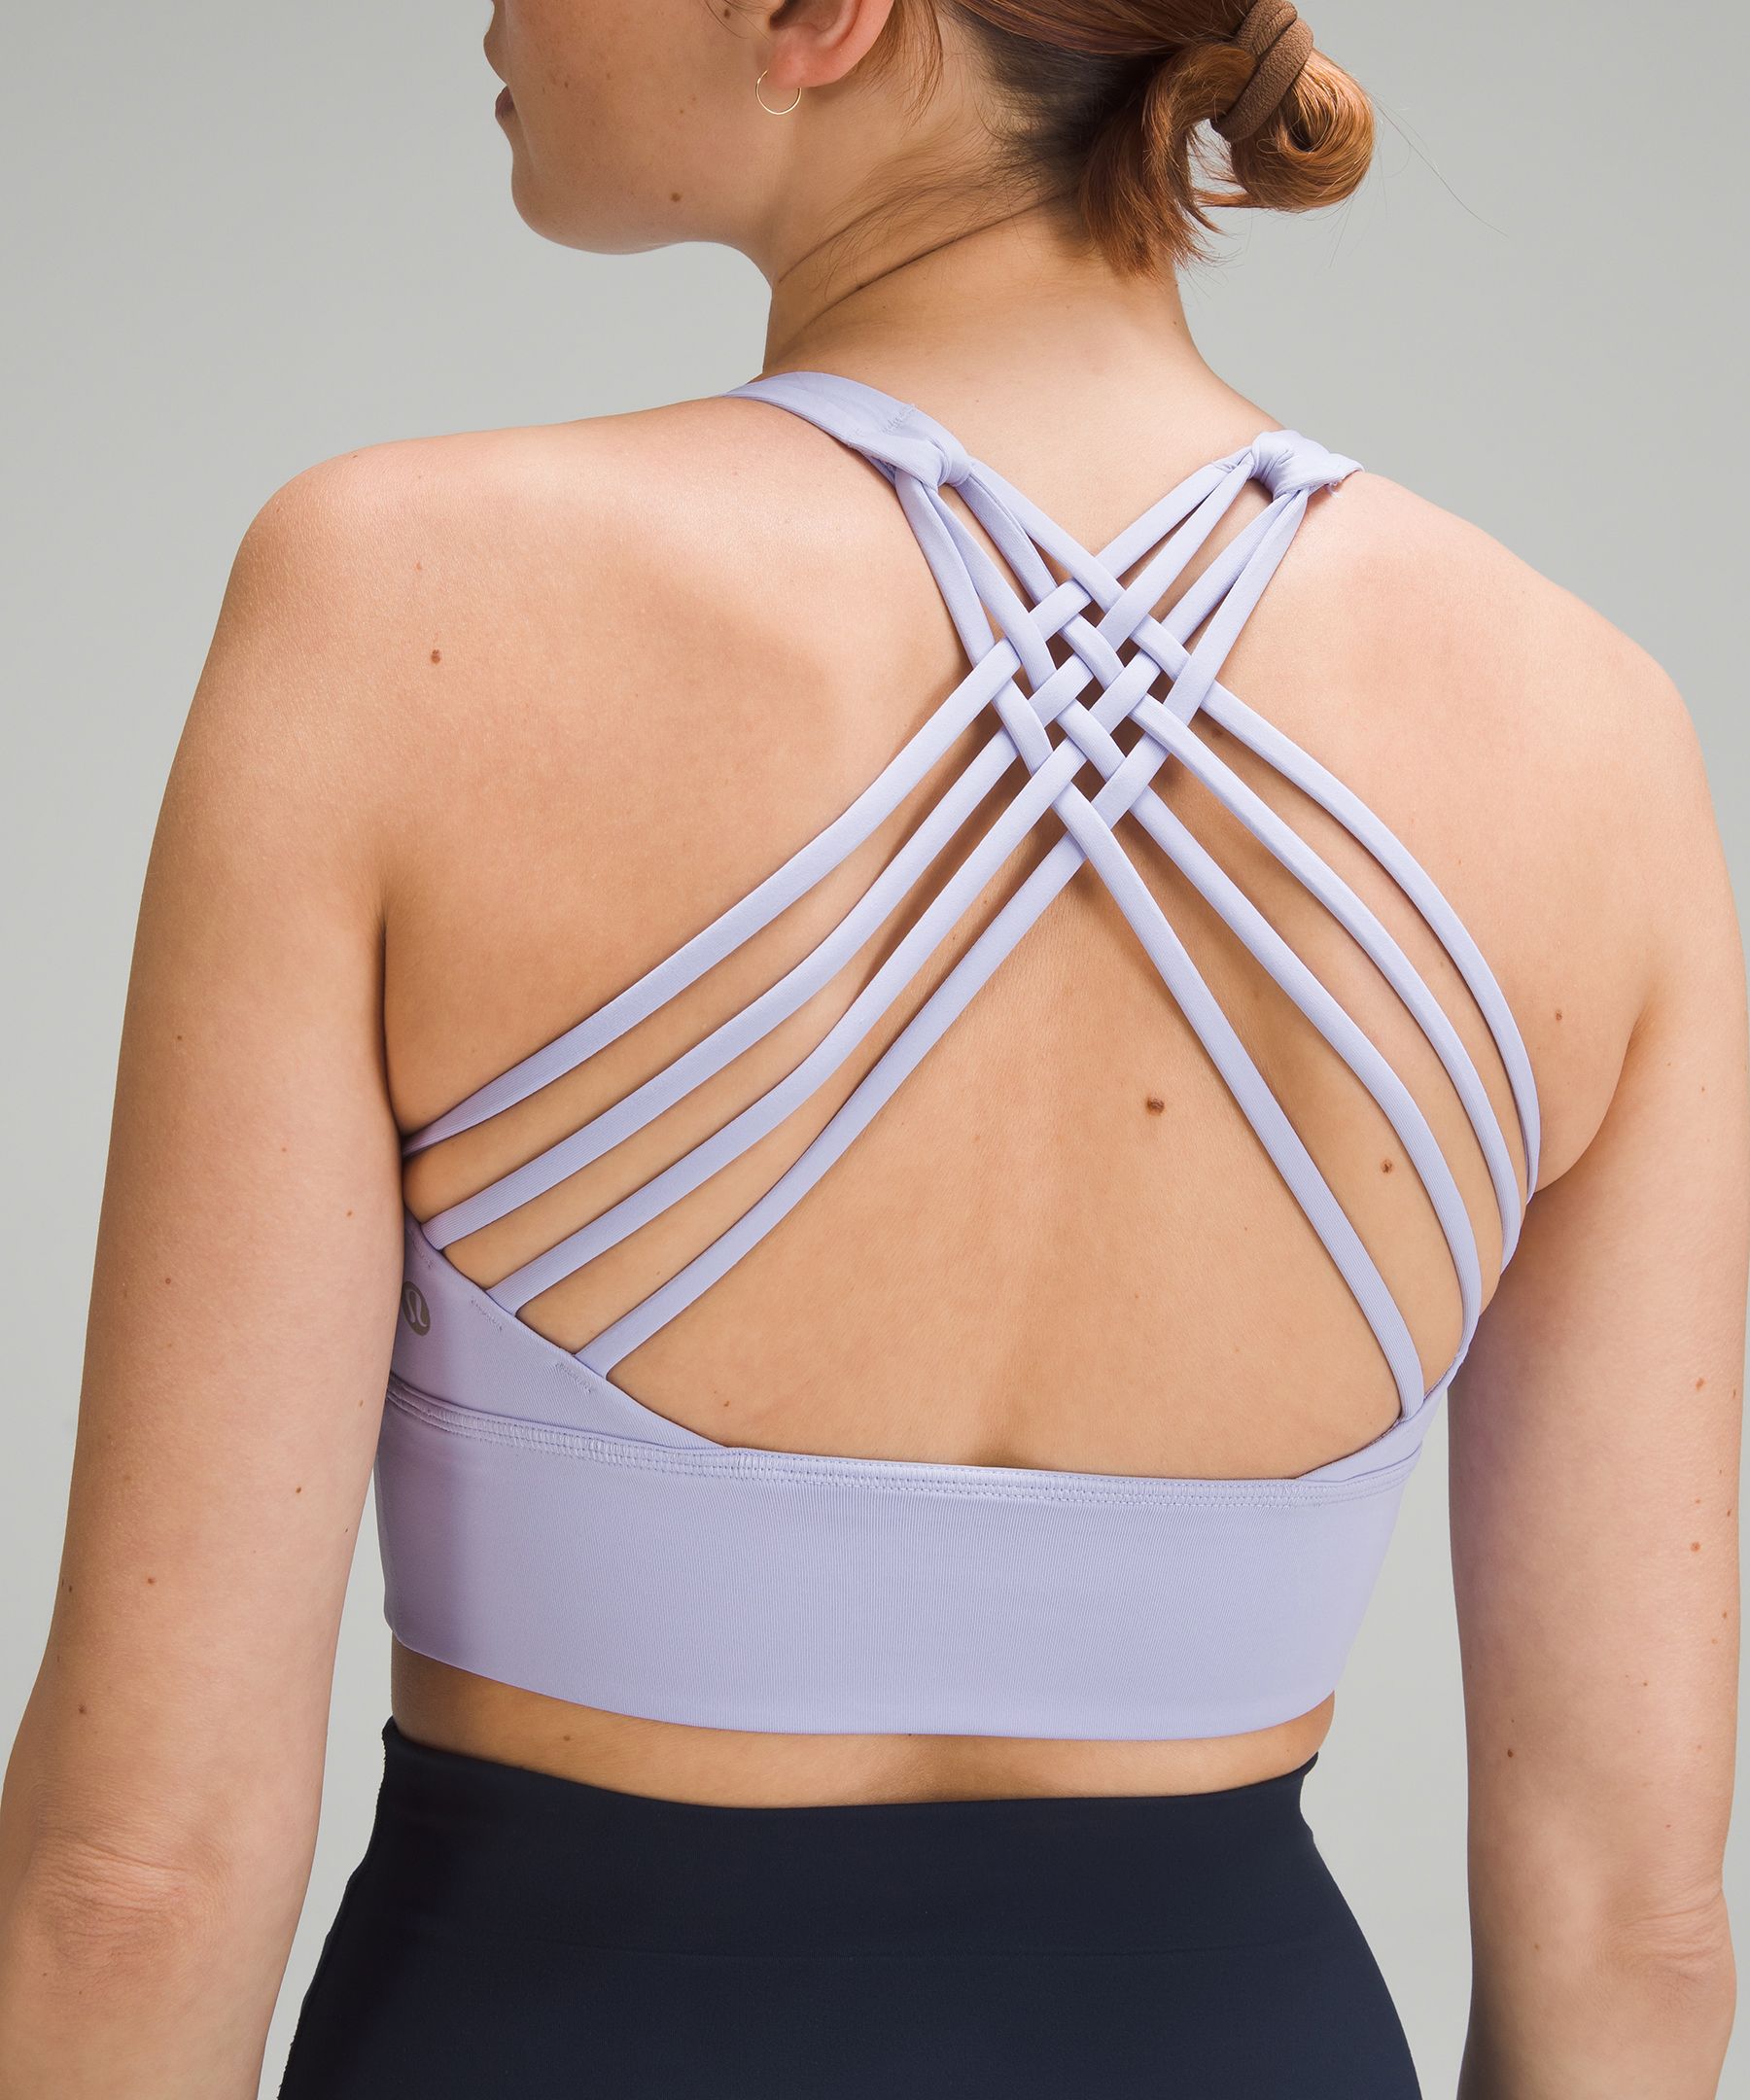 Lululemon Free to Be Longline Bra - Wild *Light Support, A/B Cup Online Only. 5